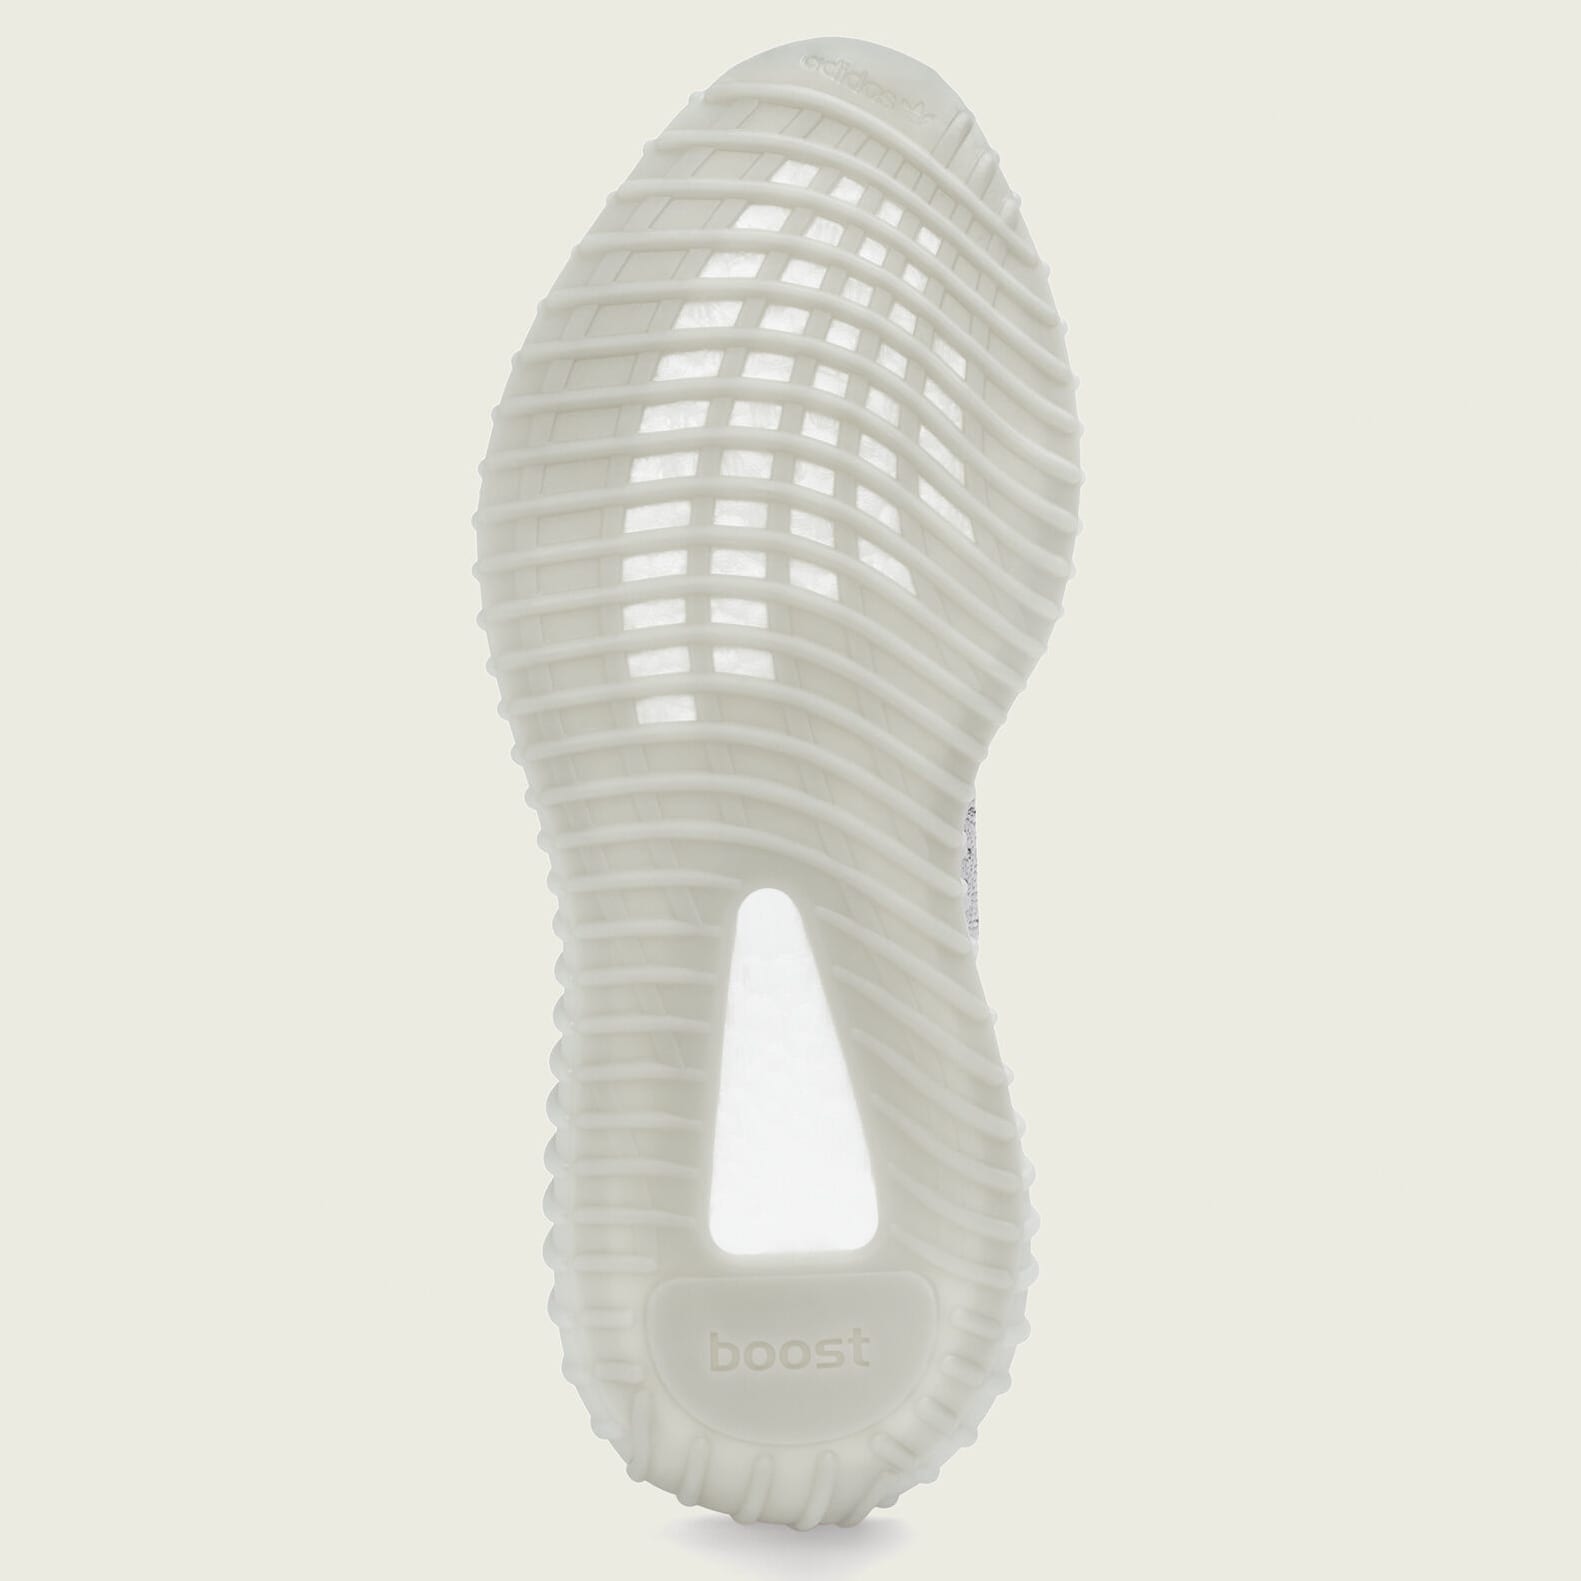 adidas-yeezy-boost-350-v2-tail-light-fx9017-outsole